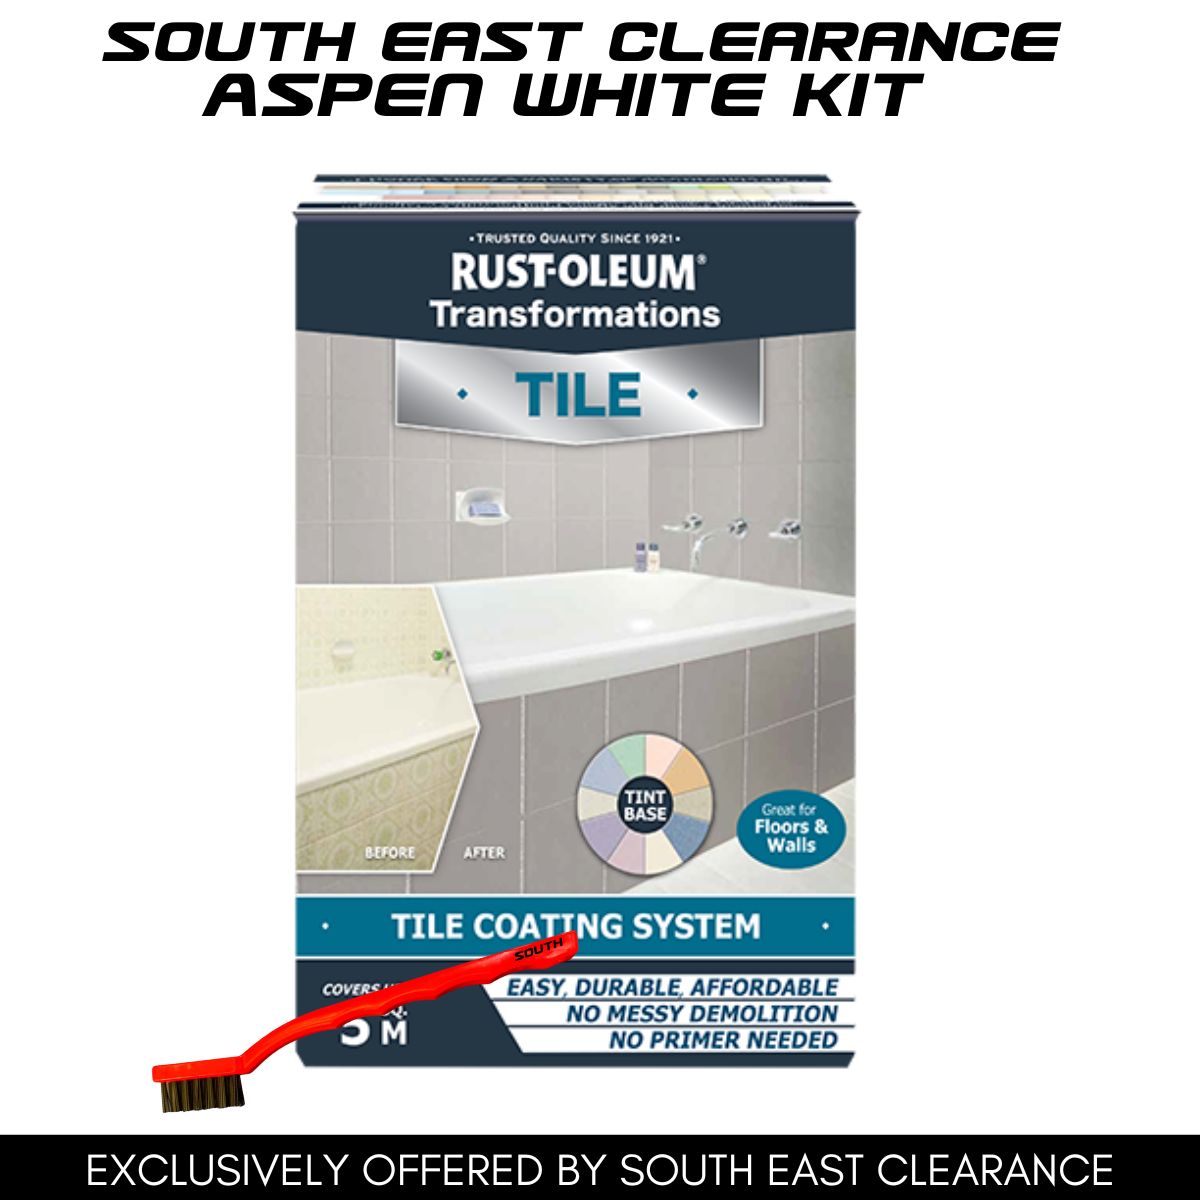 Rust-Oleum TILE TRANSFORMATIONS South East Clearance Kit, Aspen White - South East Clearance Centre